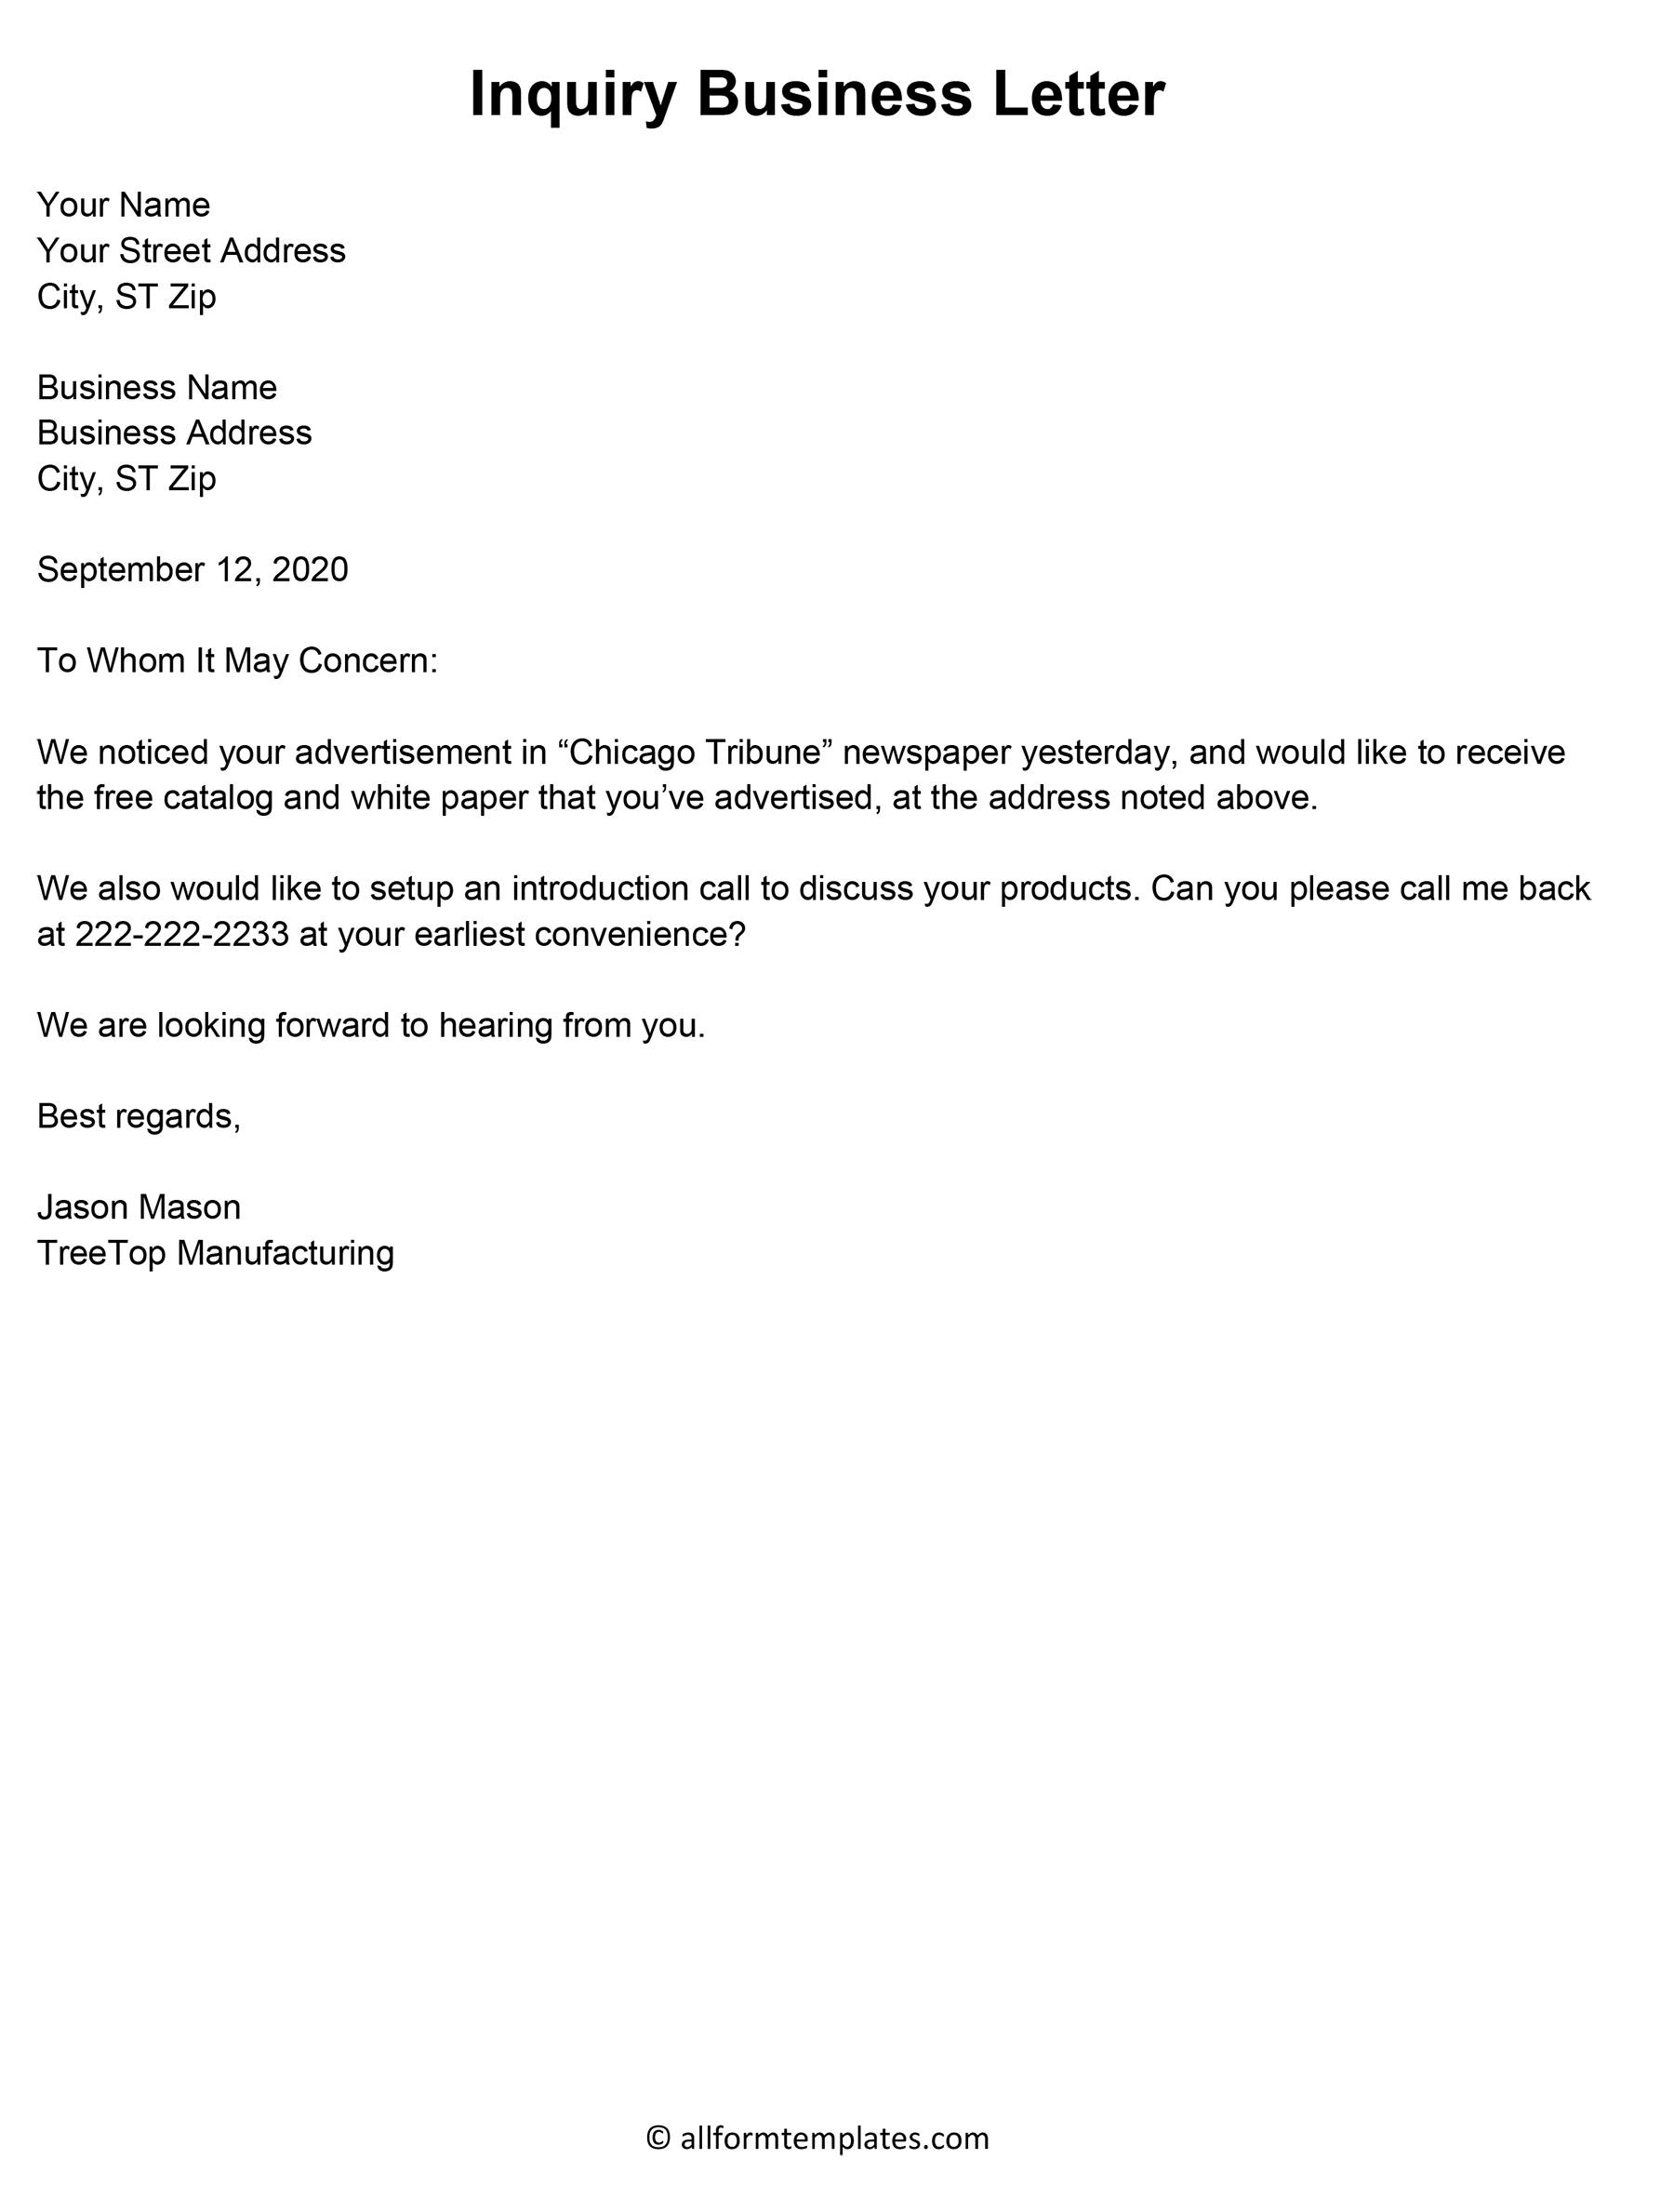 Inquiry-Business-Letter-02-HD